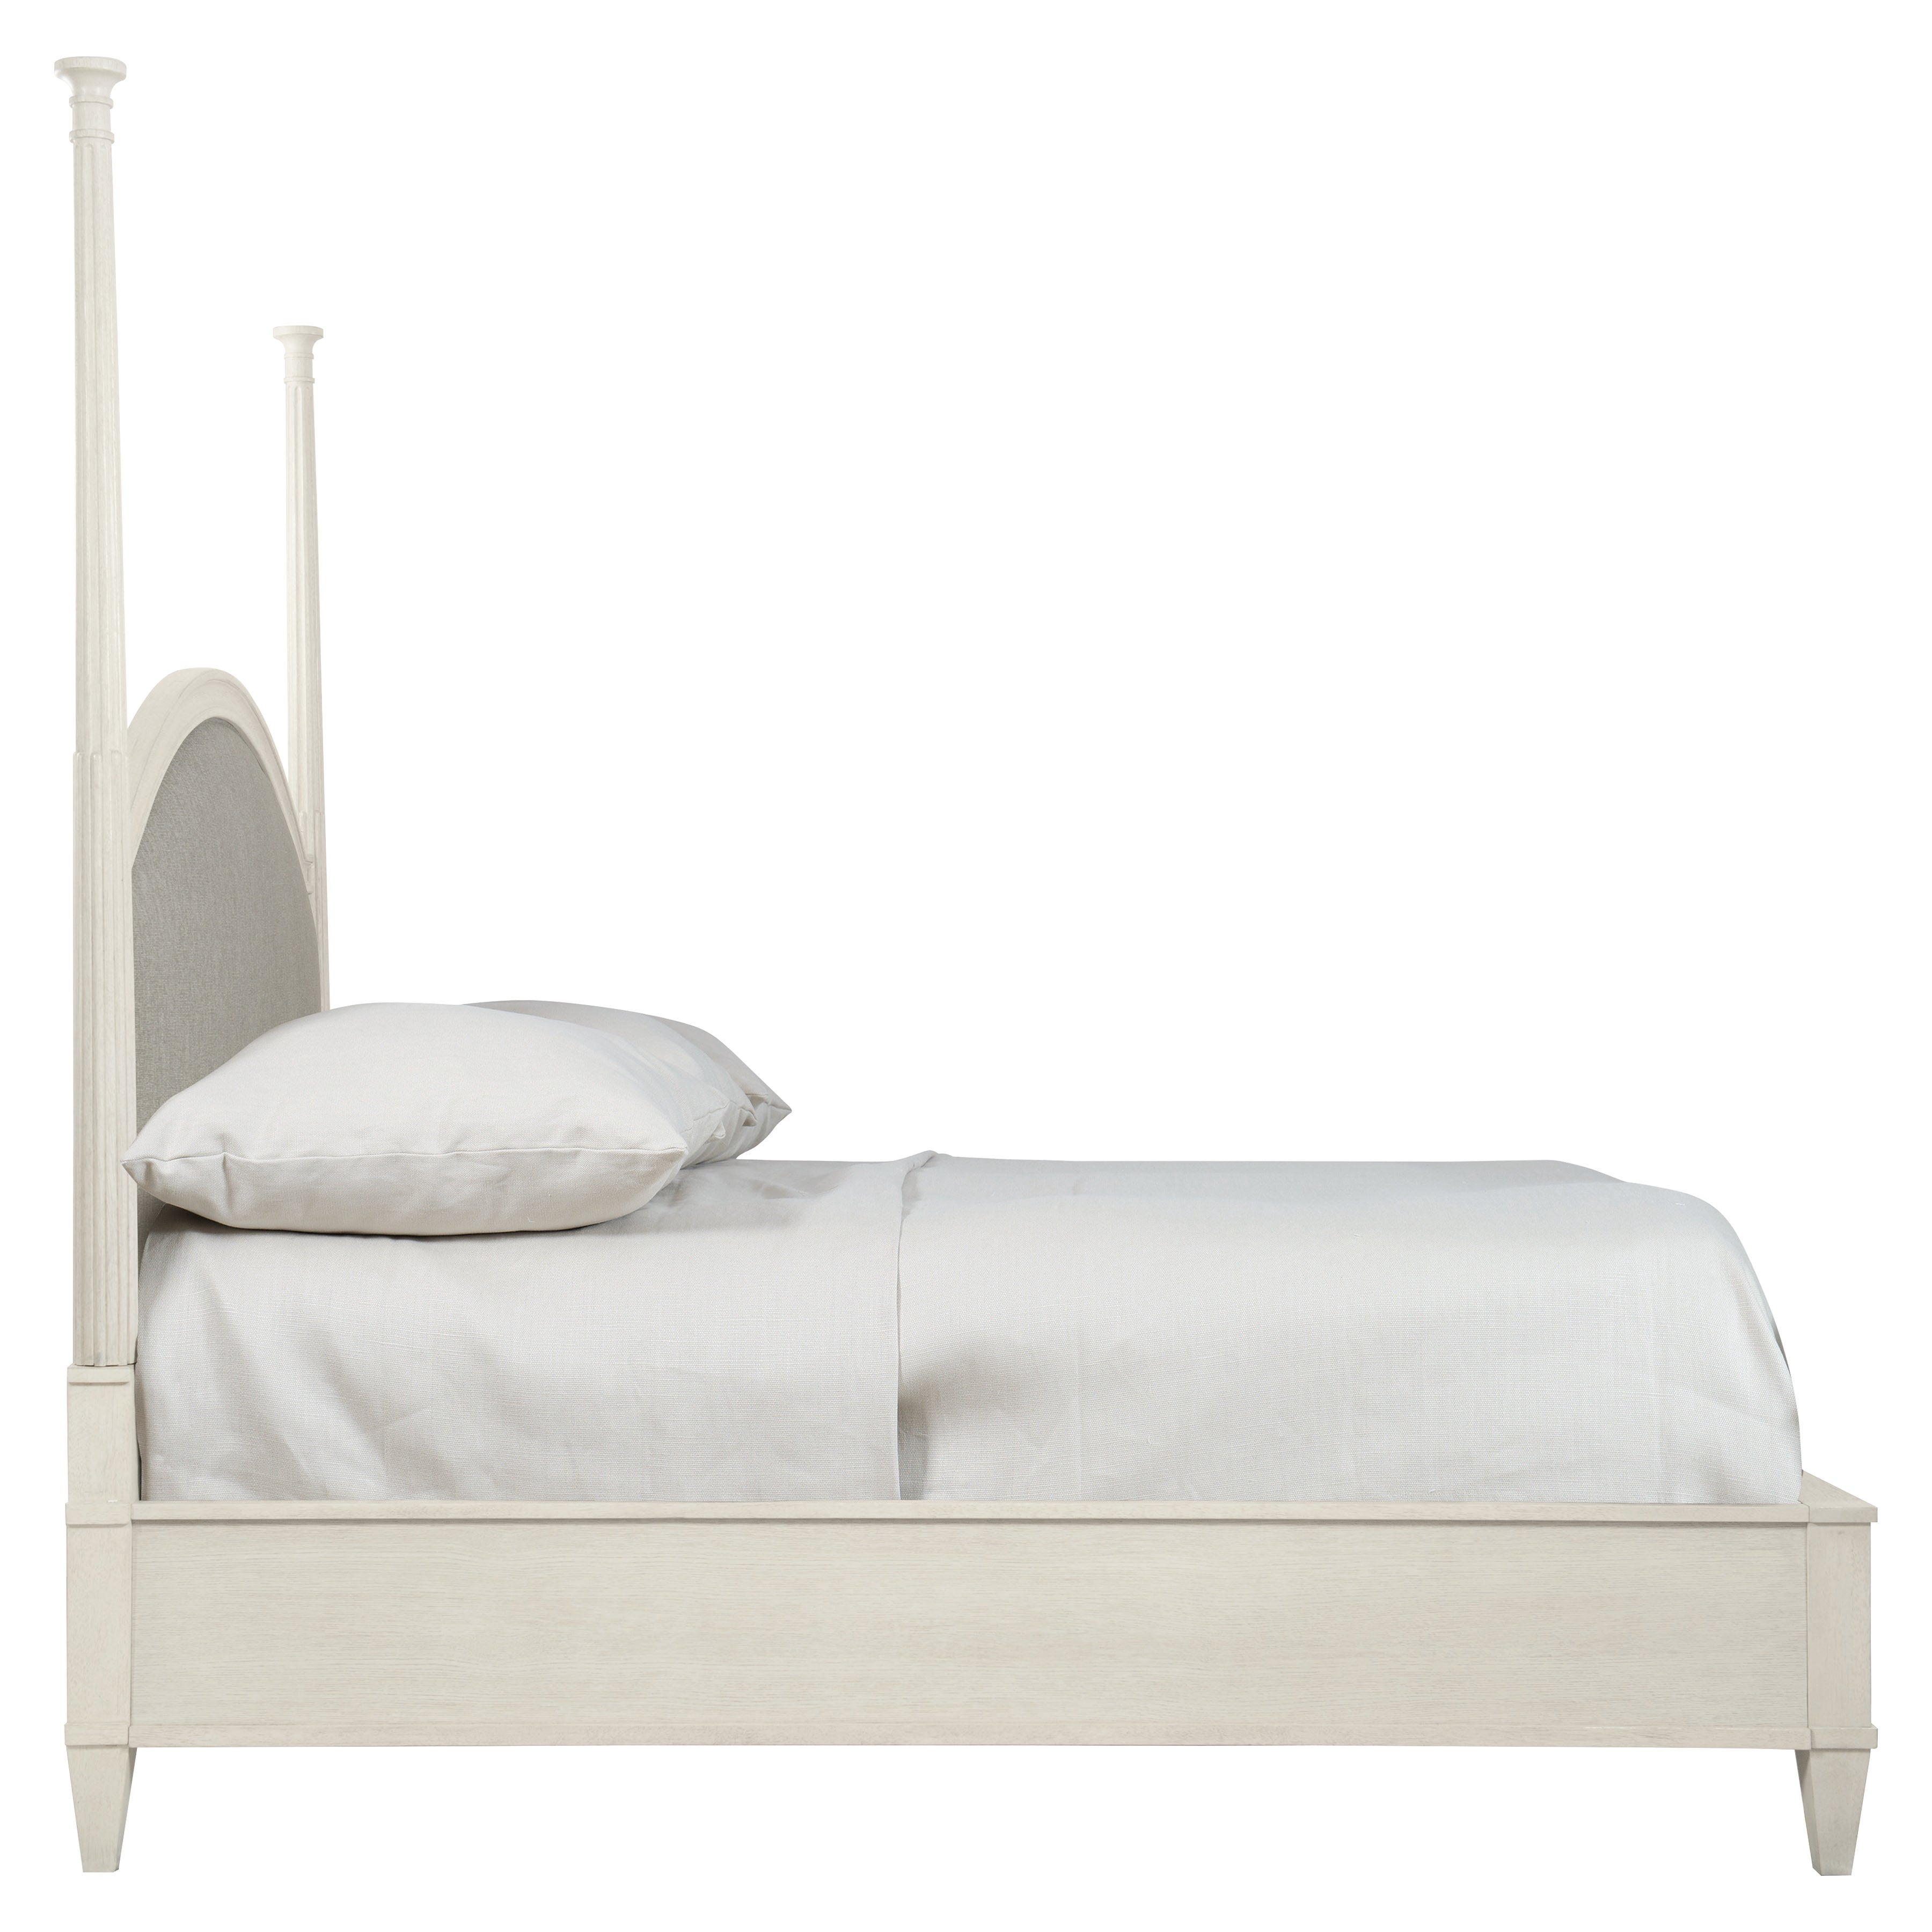 Allure Upholstered Queen Poster Bed